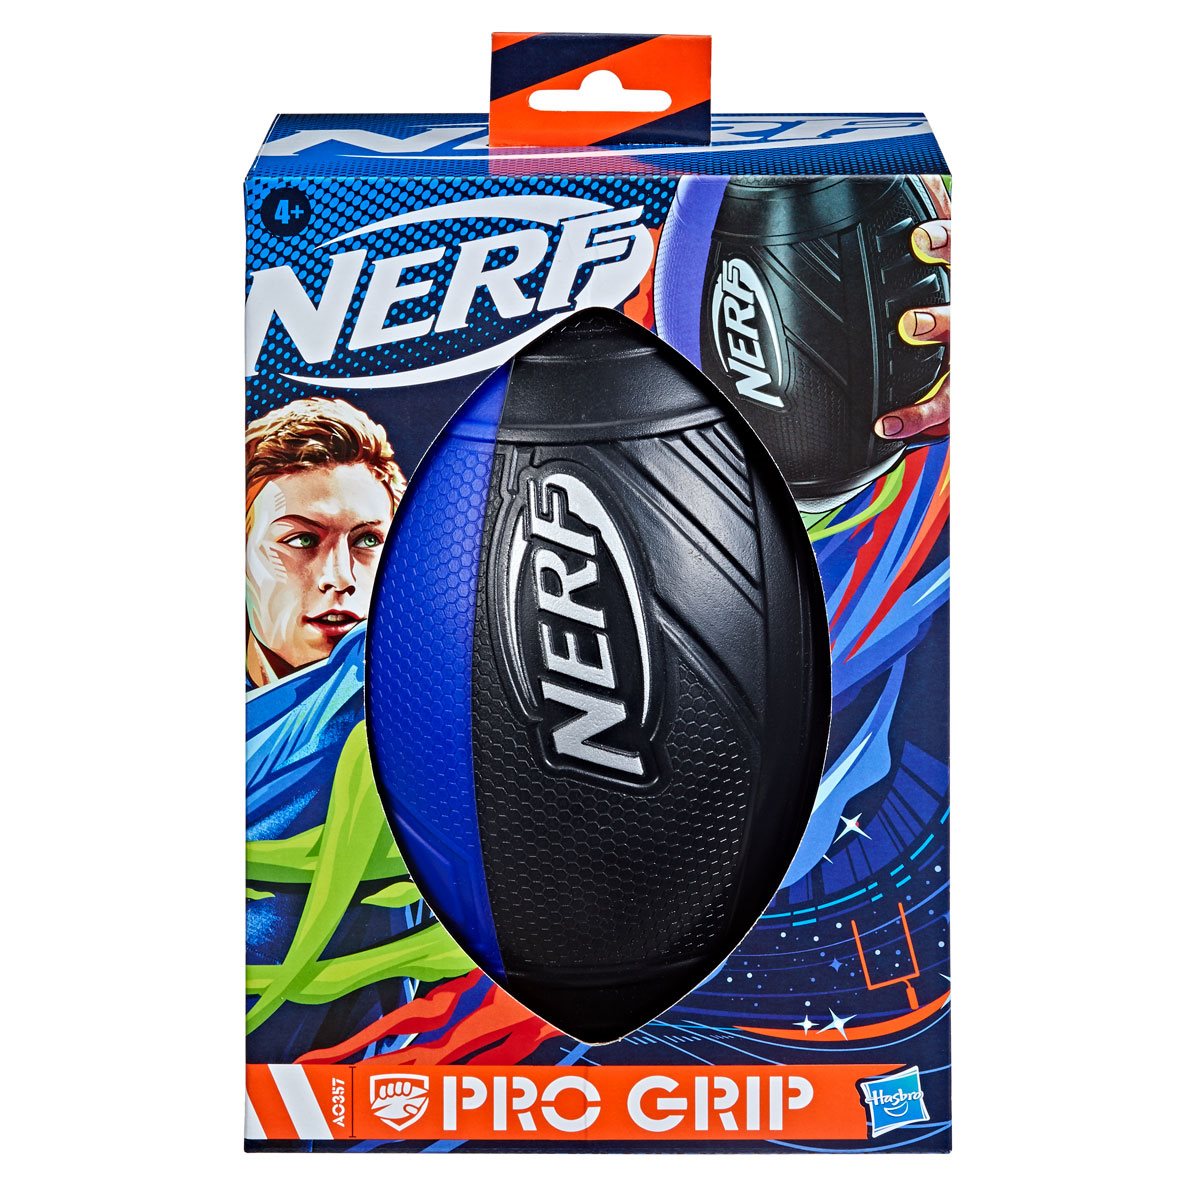 Ner Sports Pro Grip Football Blue Included for sale online Nerf 